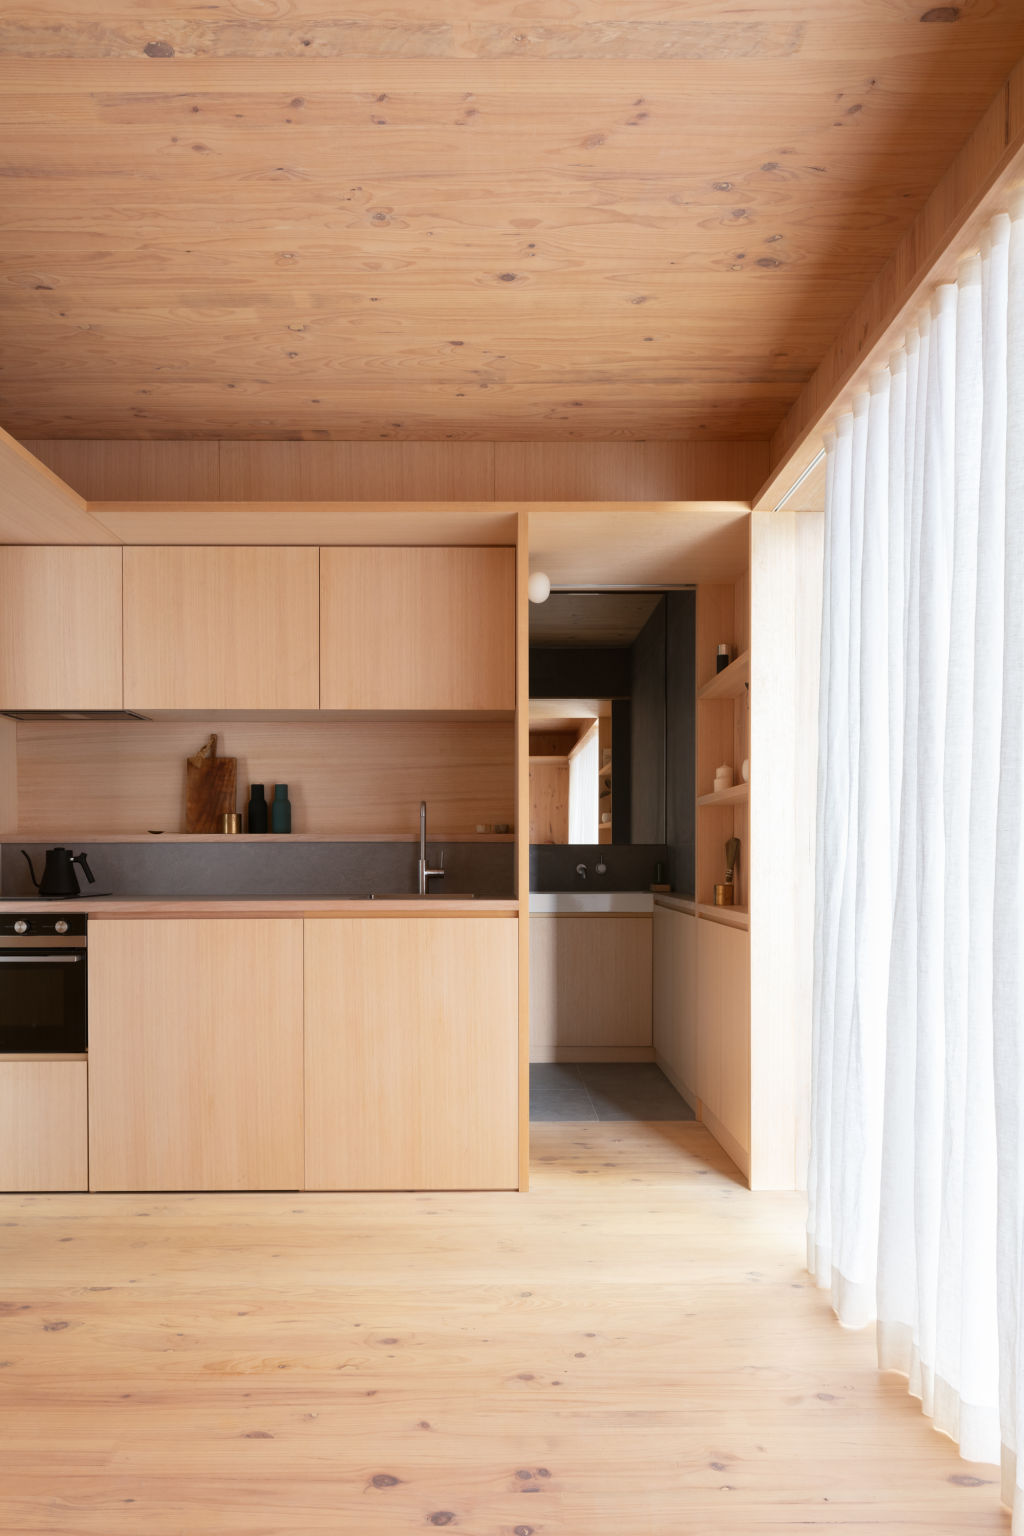 At just 20 square metres, the original Minima embraces kitchen, bathroom, living and sleeping spaces. Photo: Clinton Weaver